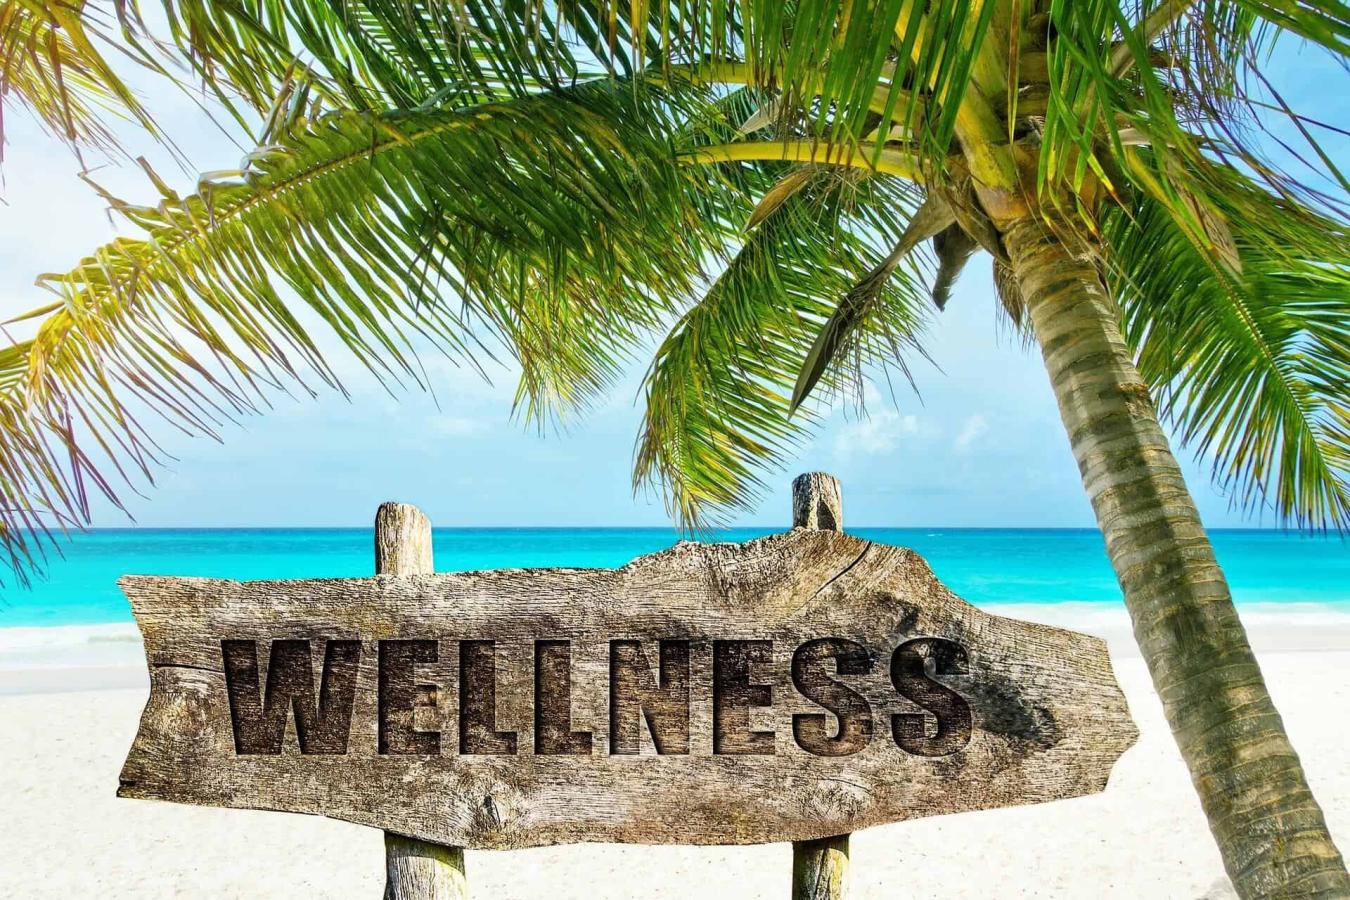 How Can I Integrate The Lessons I Learned At A Wellness Retreat Into My Daily Life?